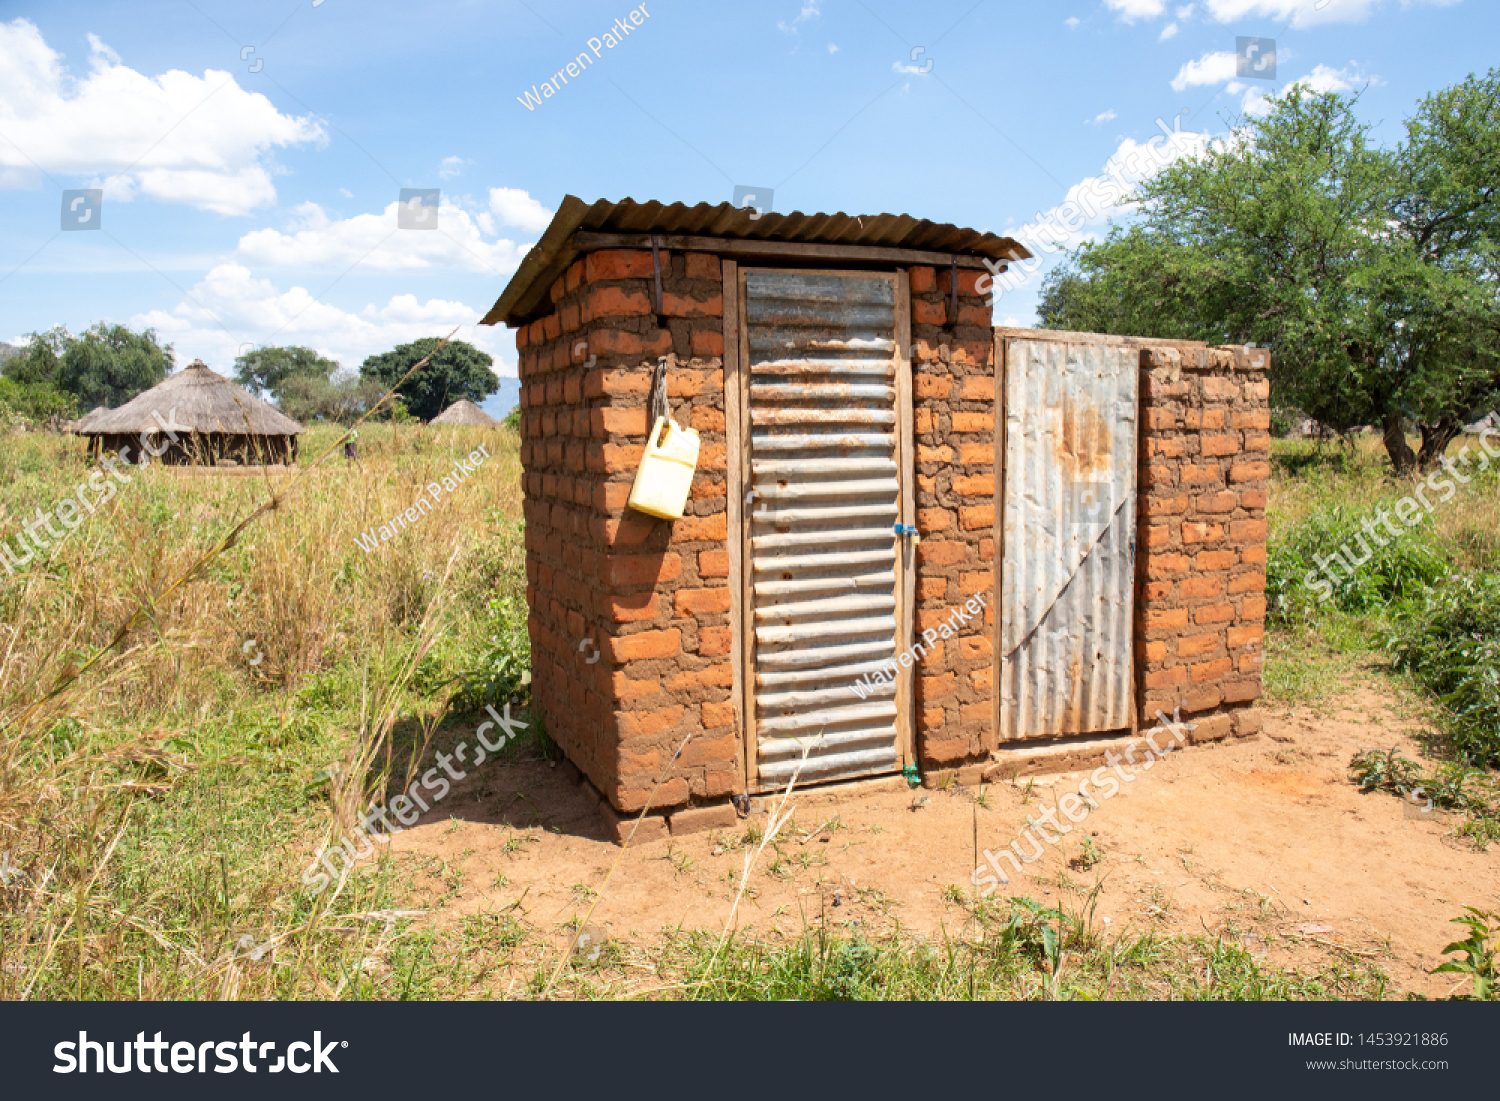 Outdoor latrine in rural uganda with hand washing station #1453921886